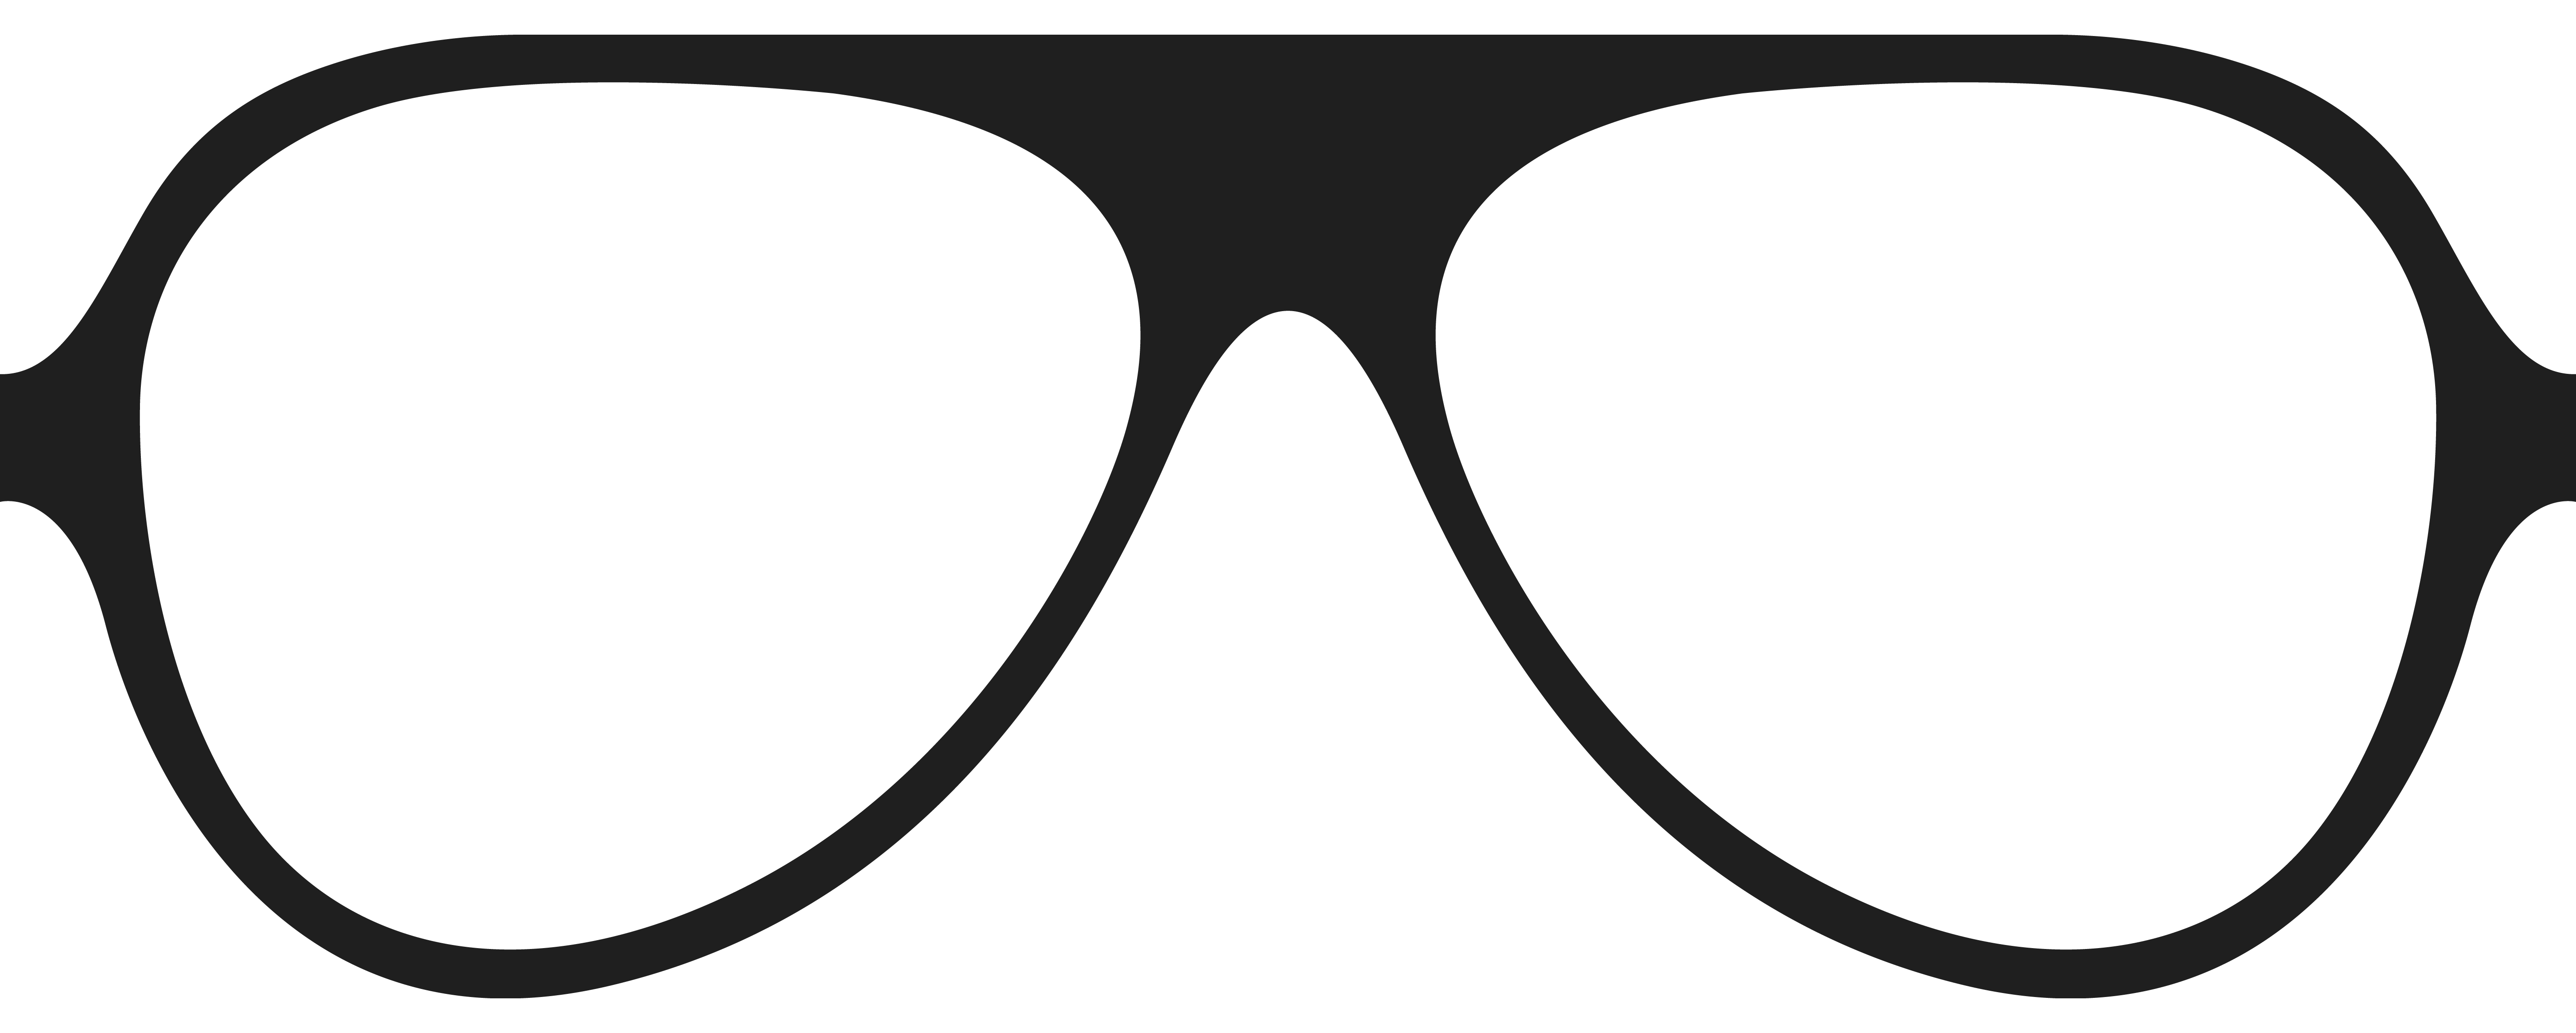 Movember glasses png picture. Sunglasses clipart printable